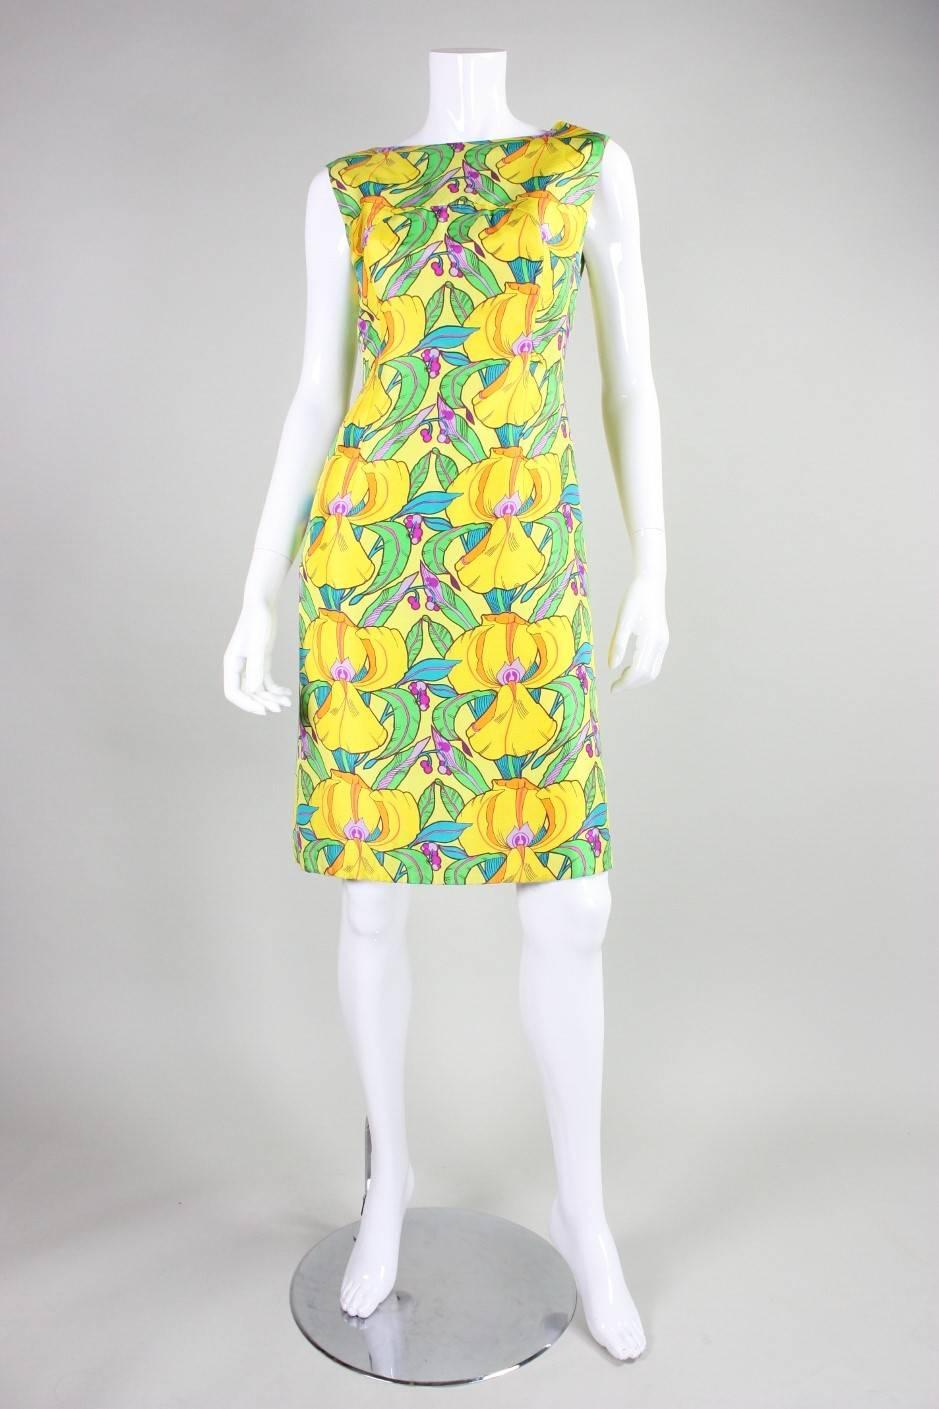 Vintage dress from La Mendola dates to the 1960's and is made of yellow silk with a polychromatic floral print. High front neck with v-neck back.  Shift-style.  Back zipper in skirt.  Fully lined.

No size label. Best suited for US 6-8. 